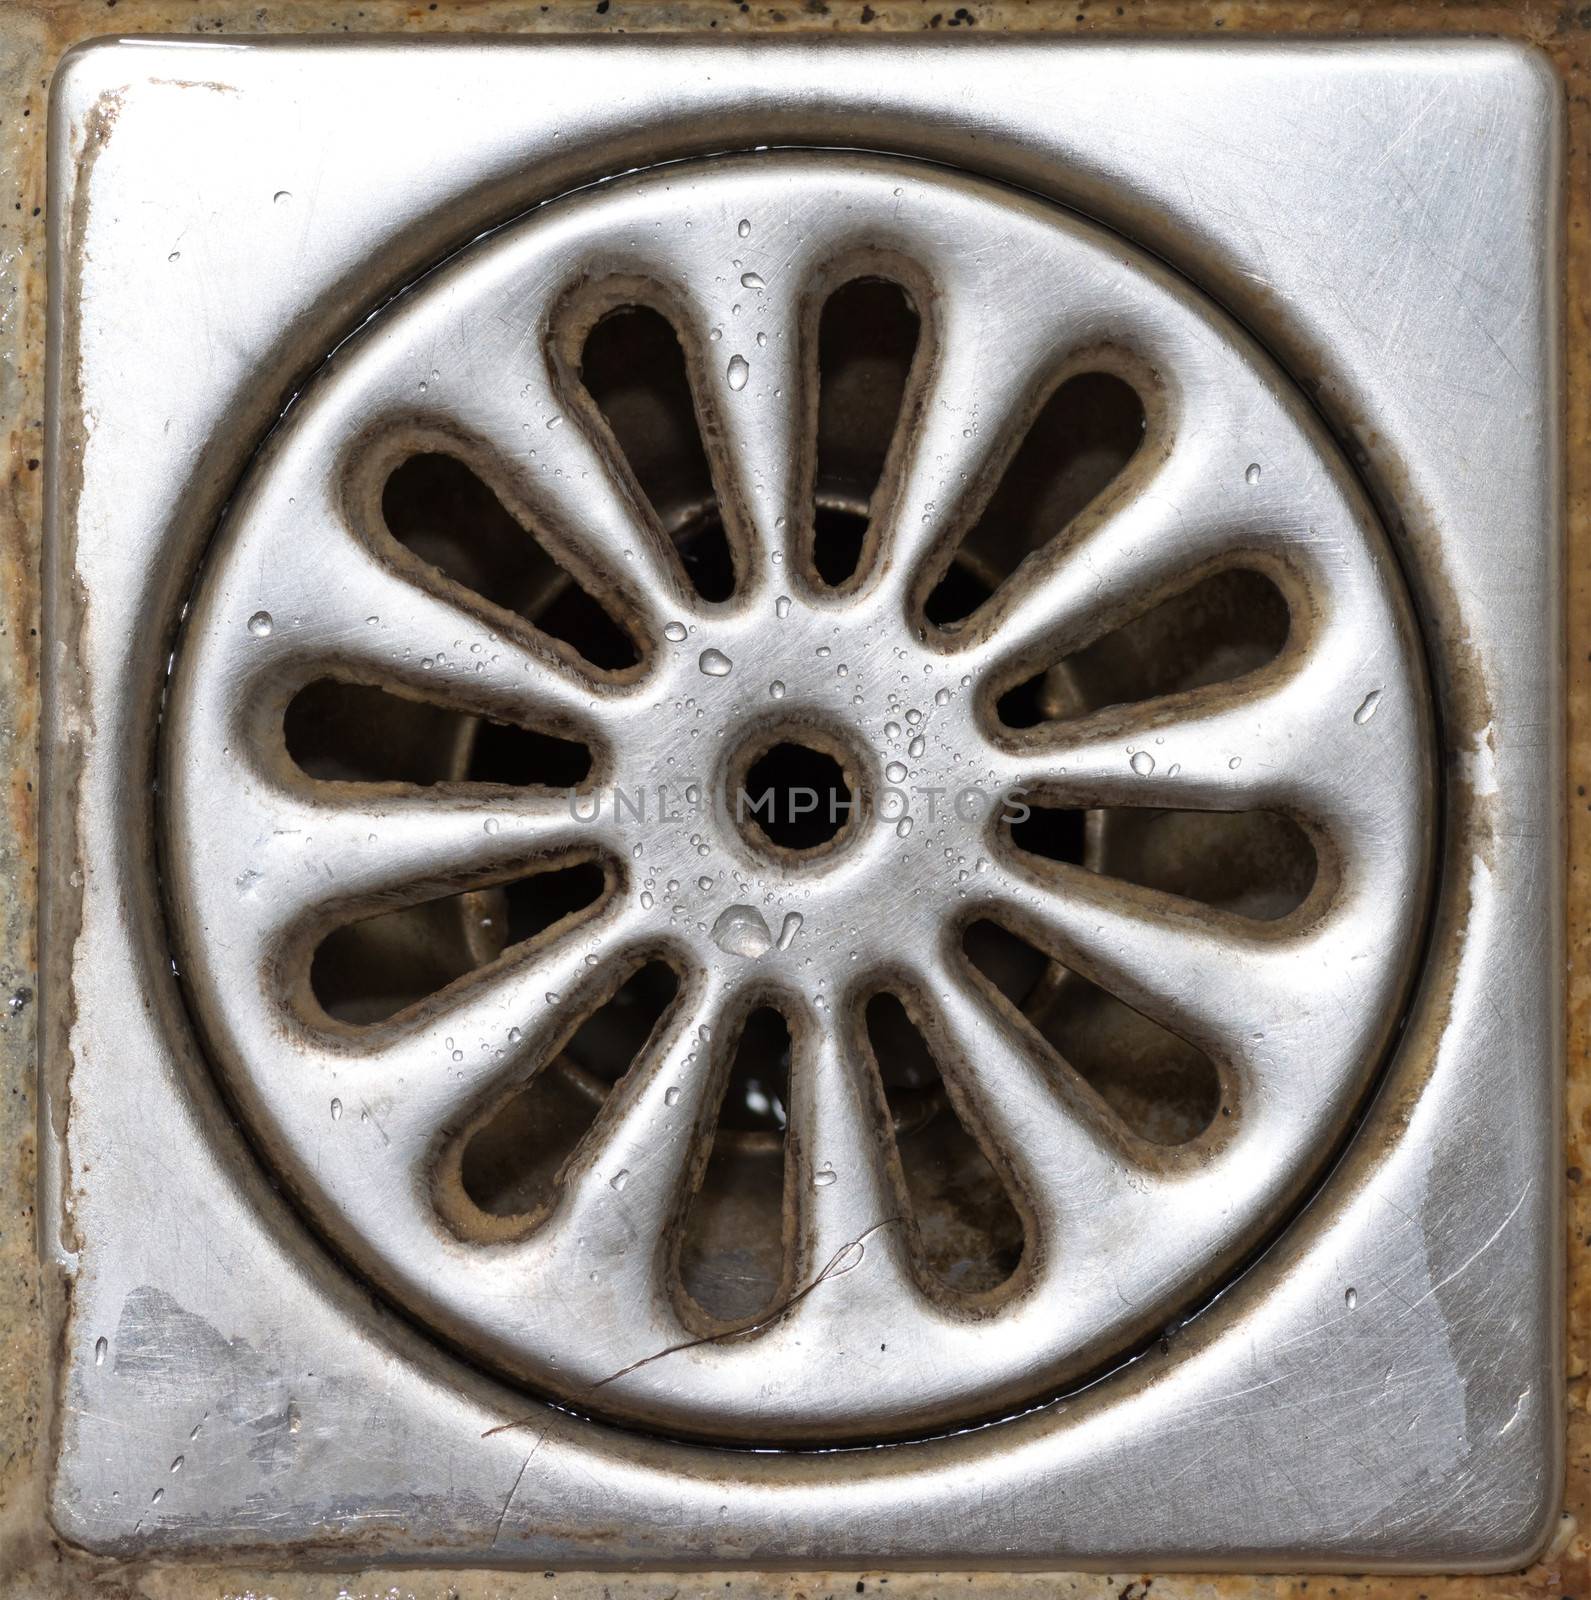 Old dirty shower drain close-up